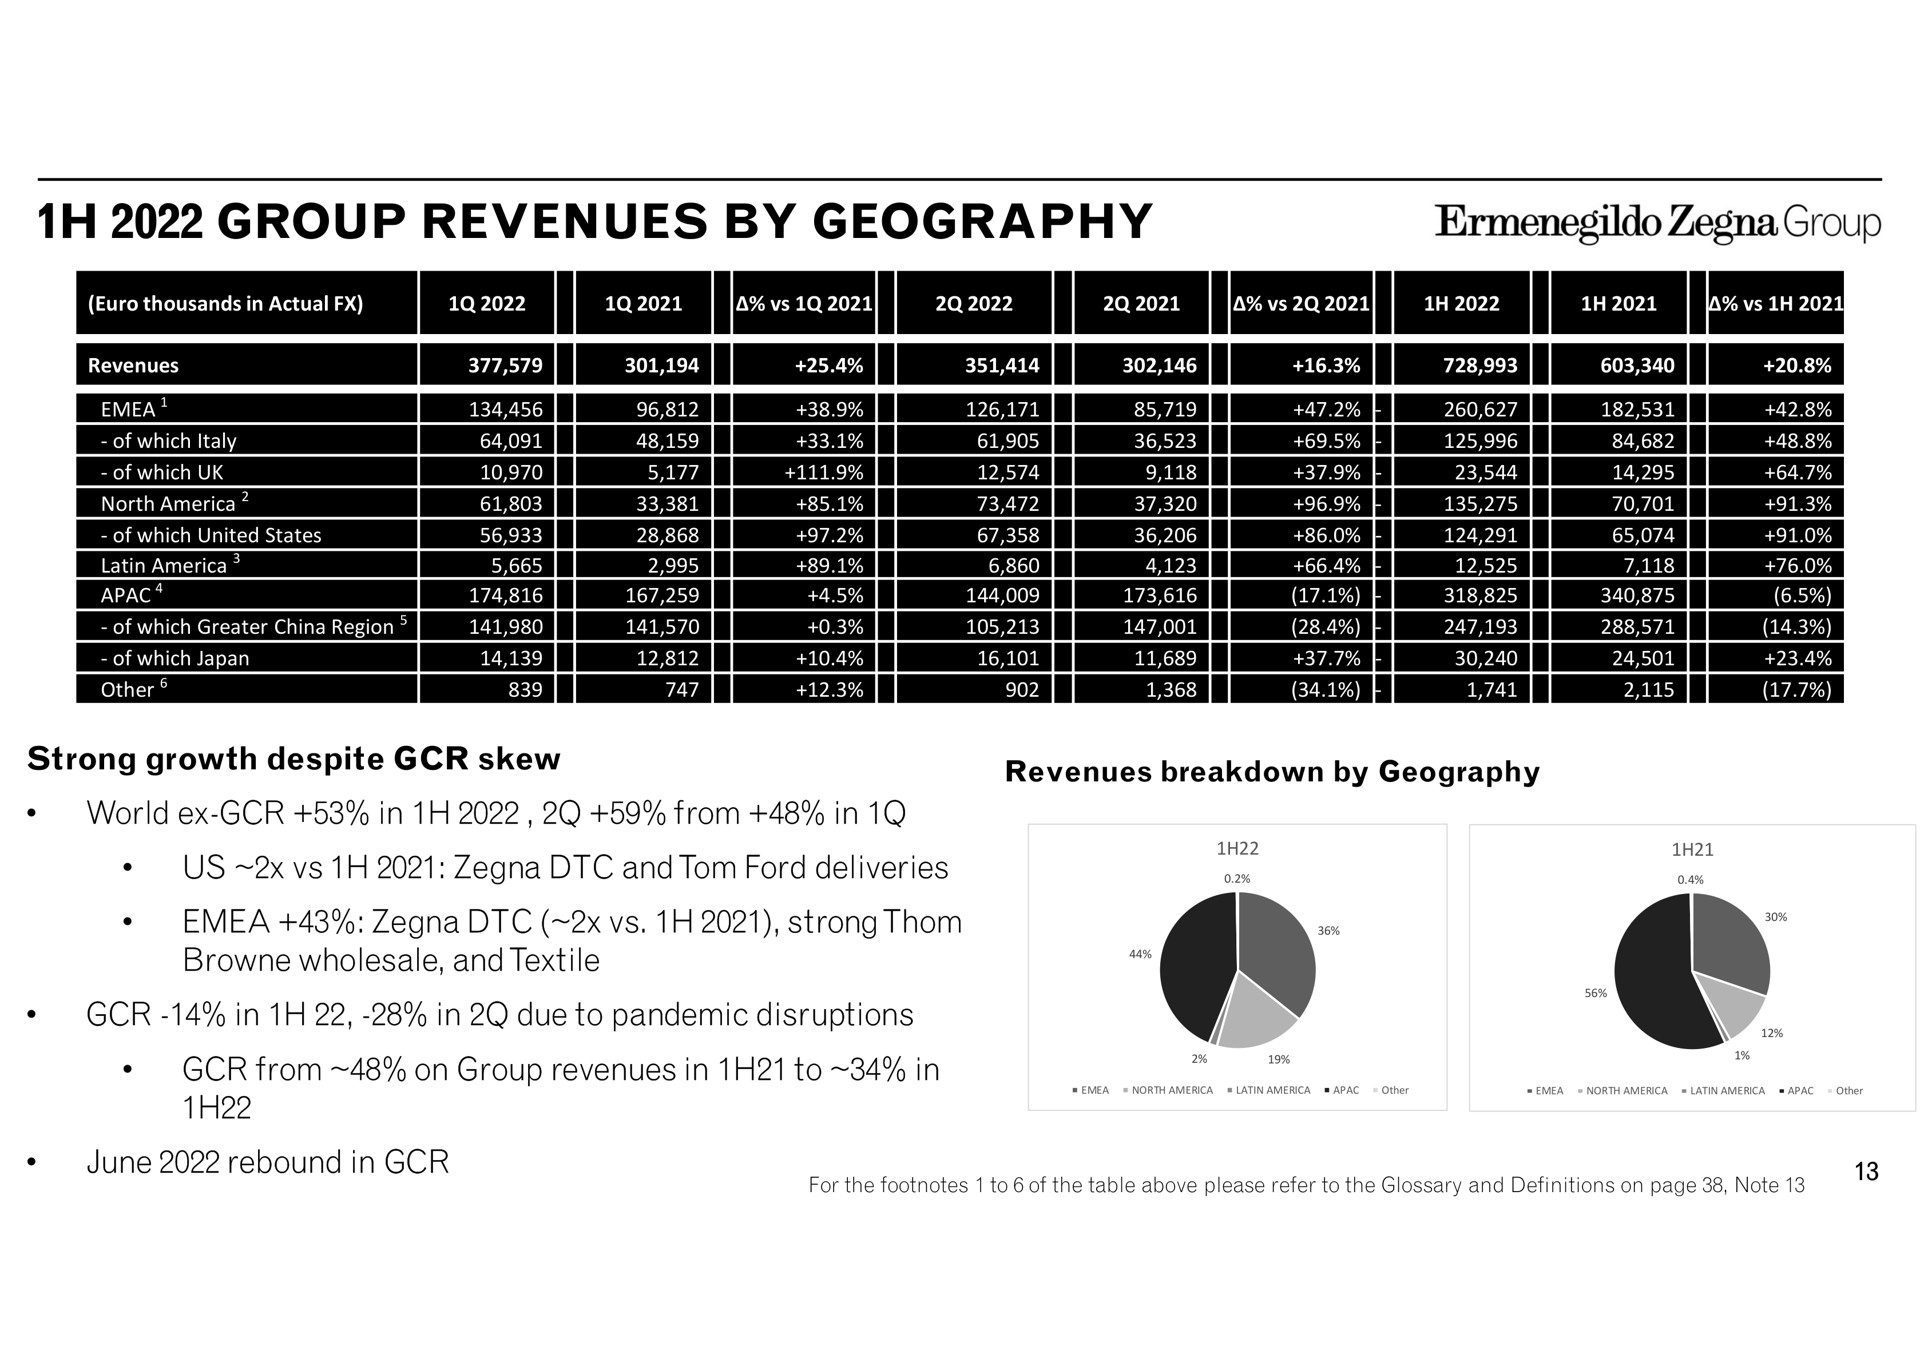 group revenues by geography strong growth despite skew world in from in us and ford deliveries strong wholesale and textile in in due to pandemic disruptions from on group revenues in to in june rebound in thousands actual a a i i be men pee a coe be one ean fee been yea tele a or we breakdown a choice cuneate those a ose for the footnotes of the table above please refer the glossary definitions page note | Zegna